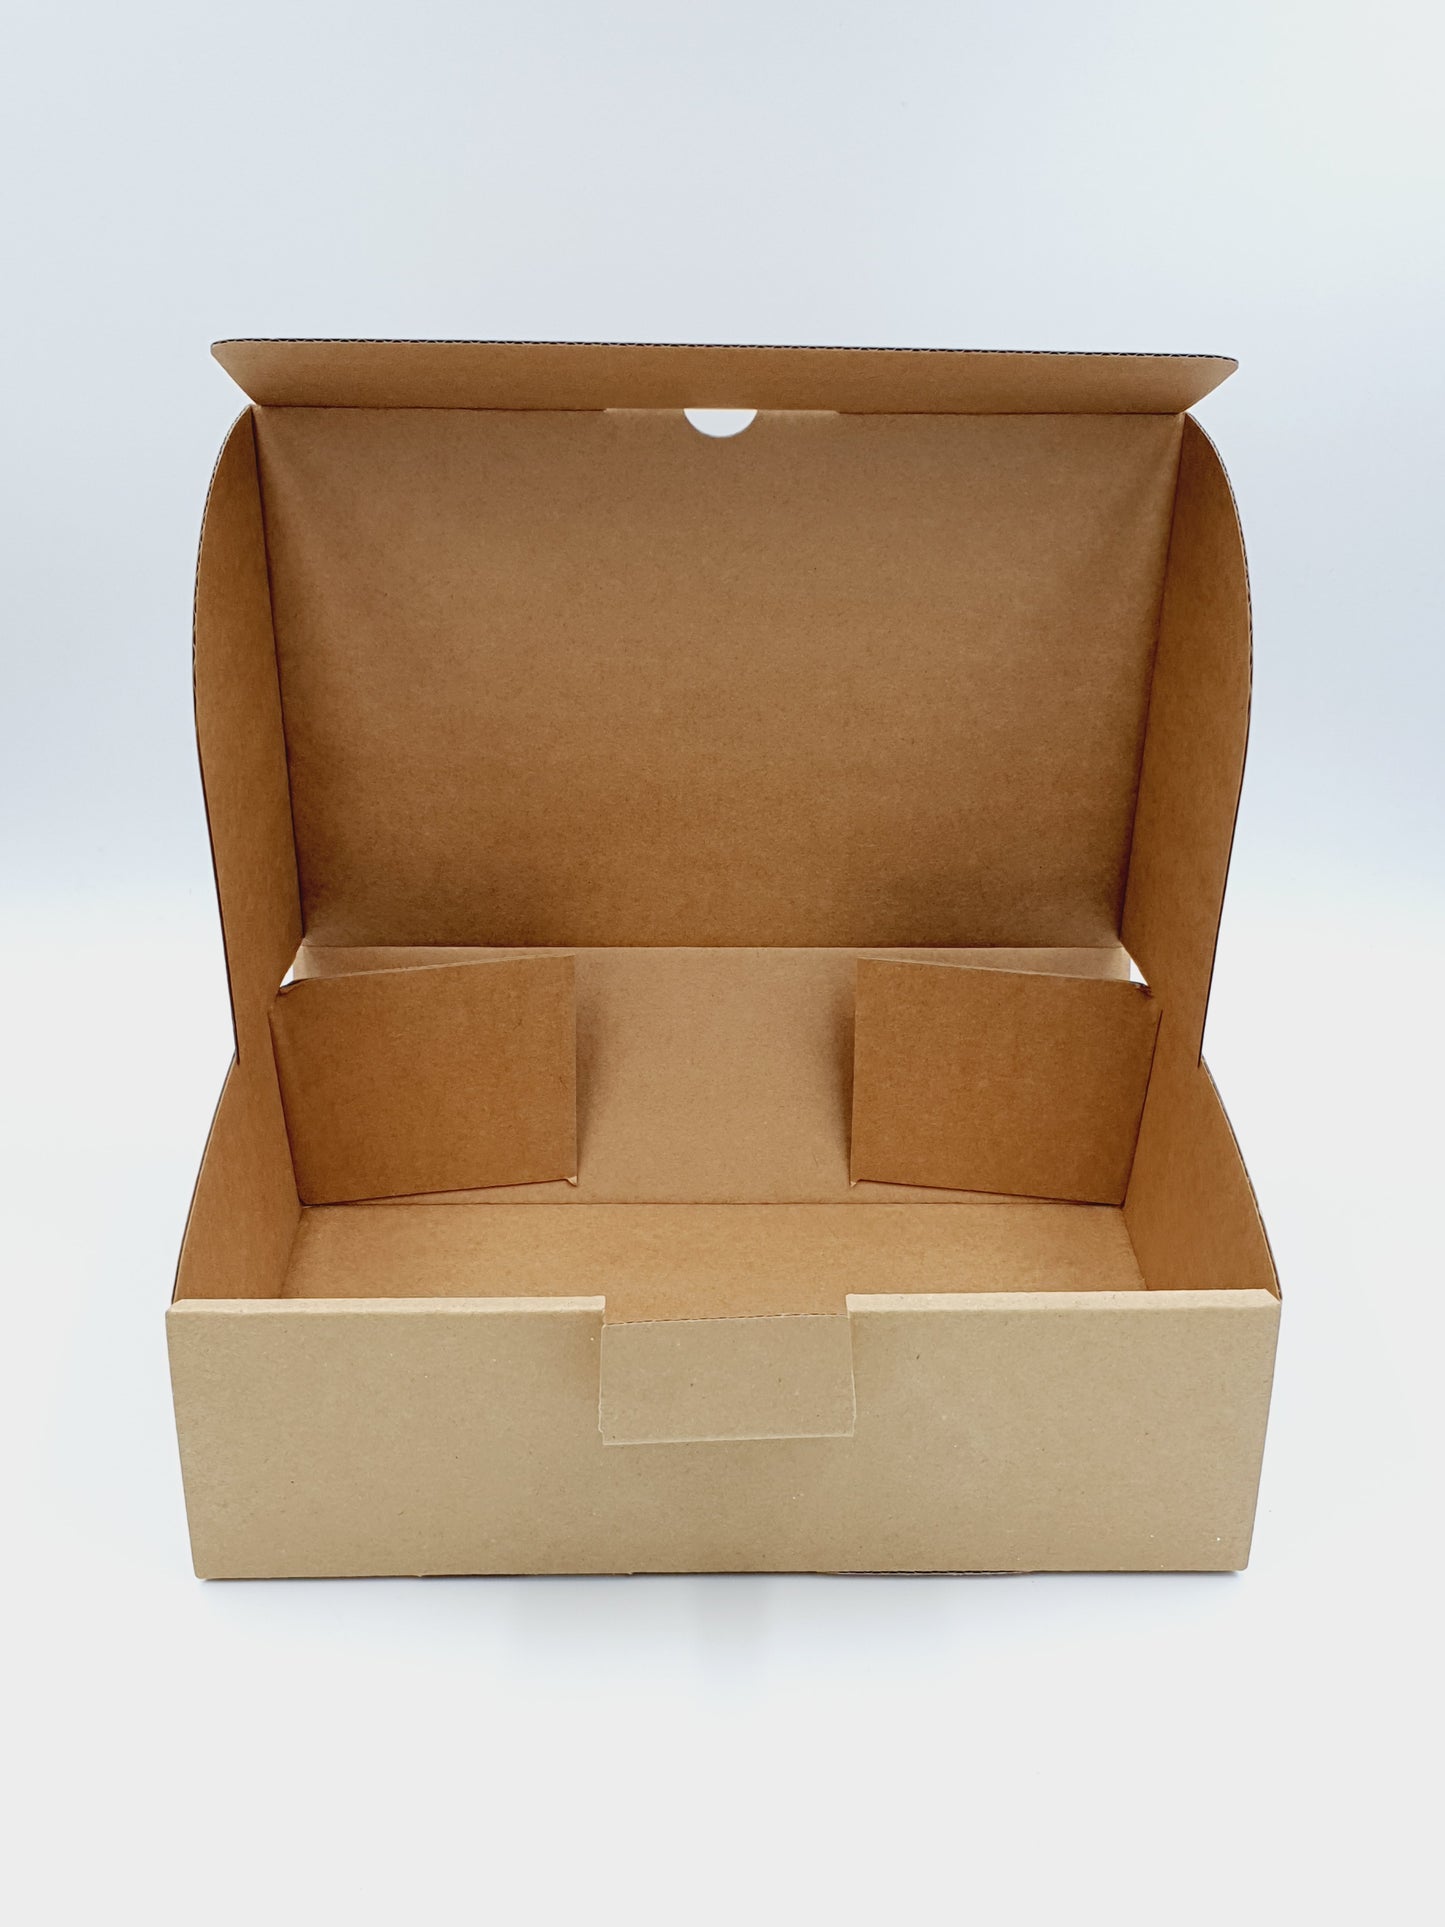 Shipping, Mail, Postal Boxes Cartons, Gift Boxes, Cardboard Boxes